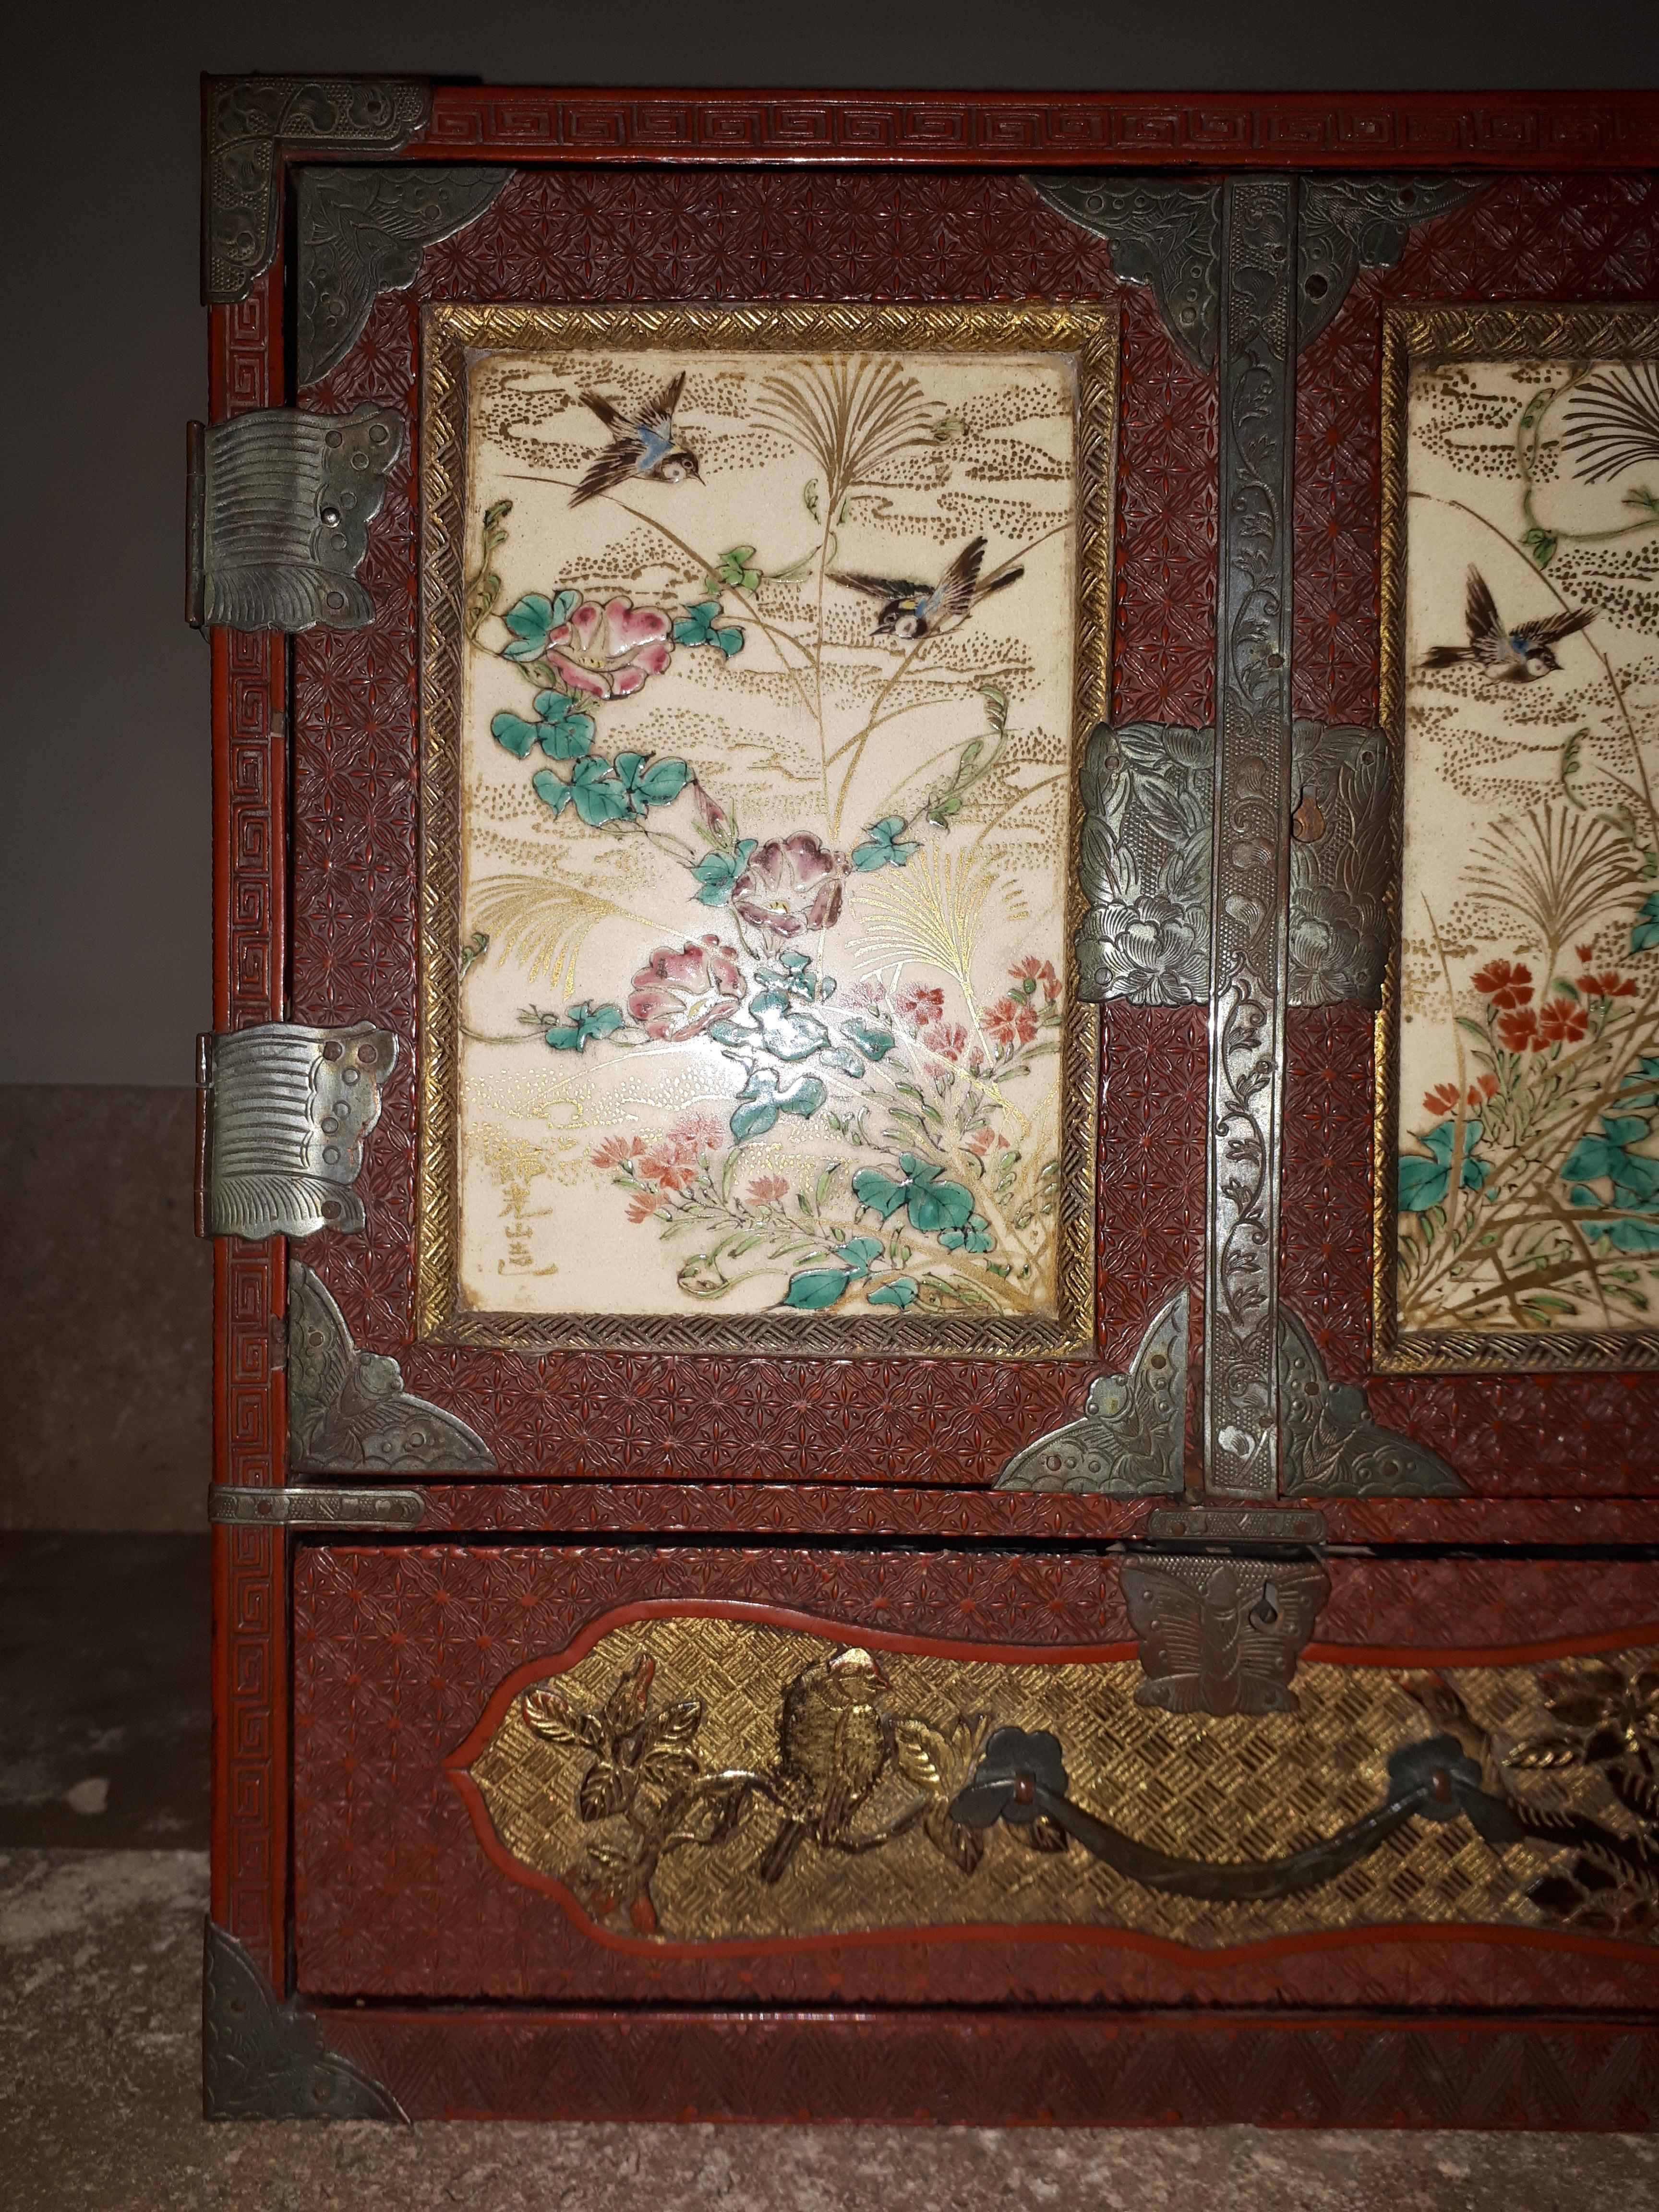 Precious cabinet in carved cinnabar red lacquer with two leaves and a drawer, revealing six small drawers.
The doors are adorned with a porcelain plaque decorated with tits flying among flowers. Each marked with a reputed signature : “Kinkozan zo,”